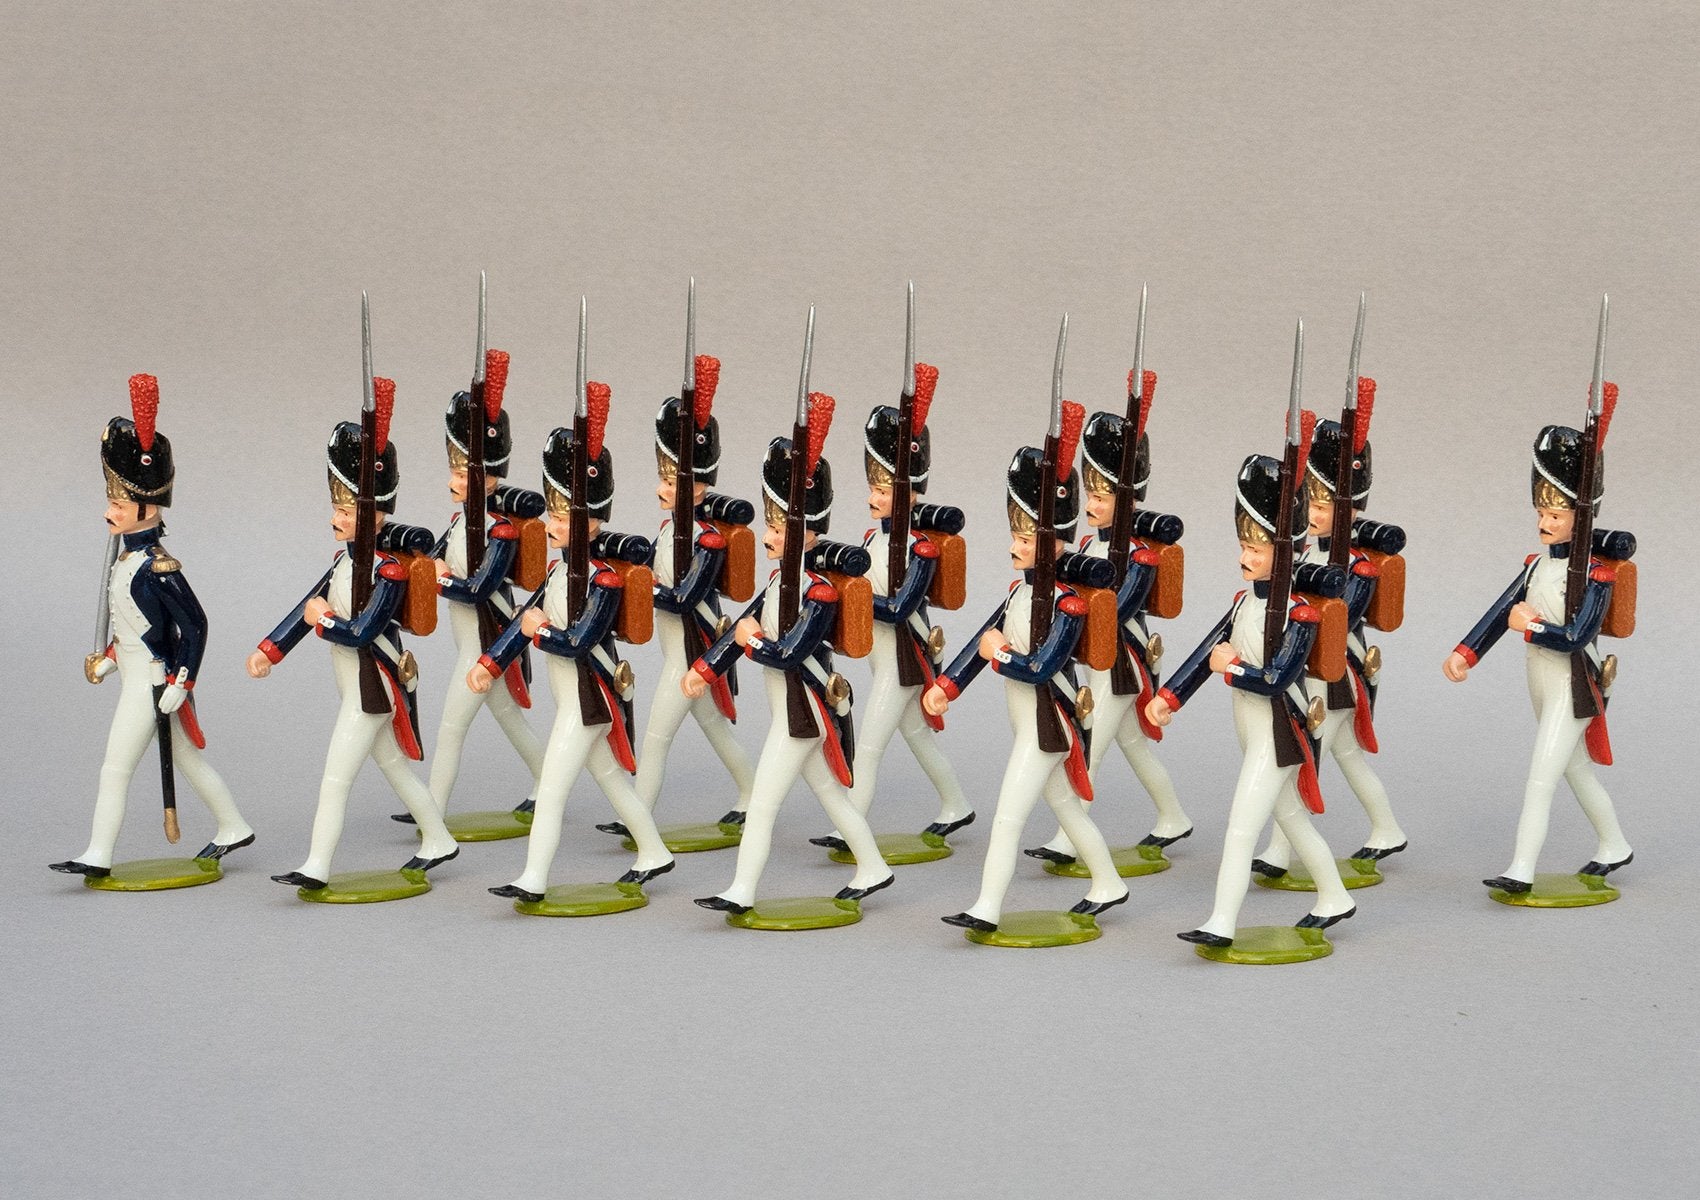 Set 107a Grenadiers à Pied | French Infantry | Napoleonic Wars | Combined sets 107 and 107a showing 12 Grenadiers, one officer and eleven men | Waterloo | © Imperial Productions | Sculpt by David Cowe